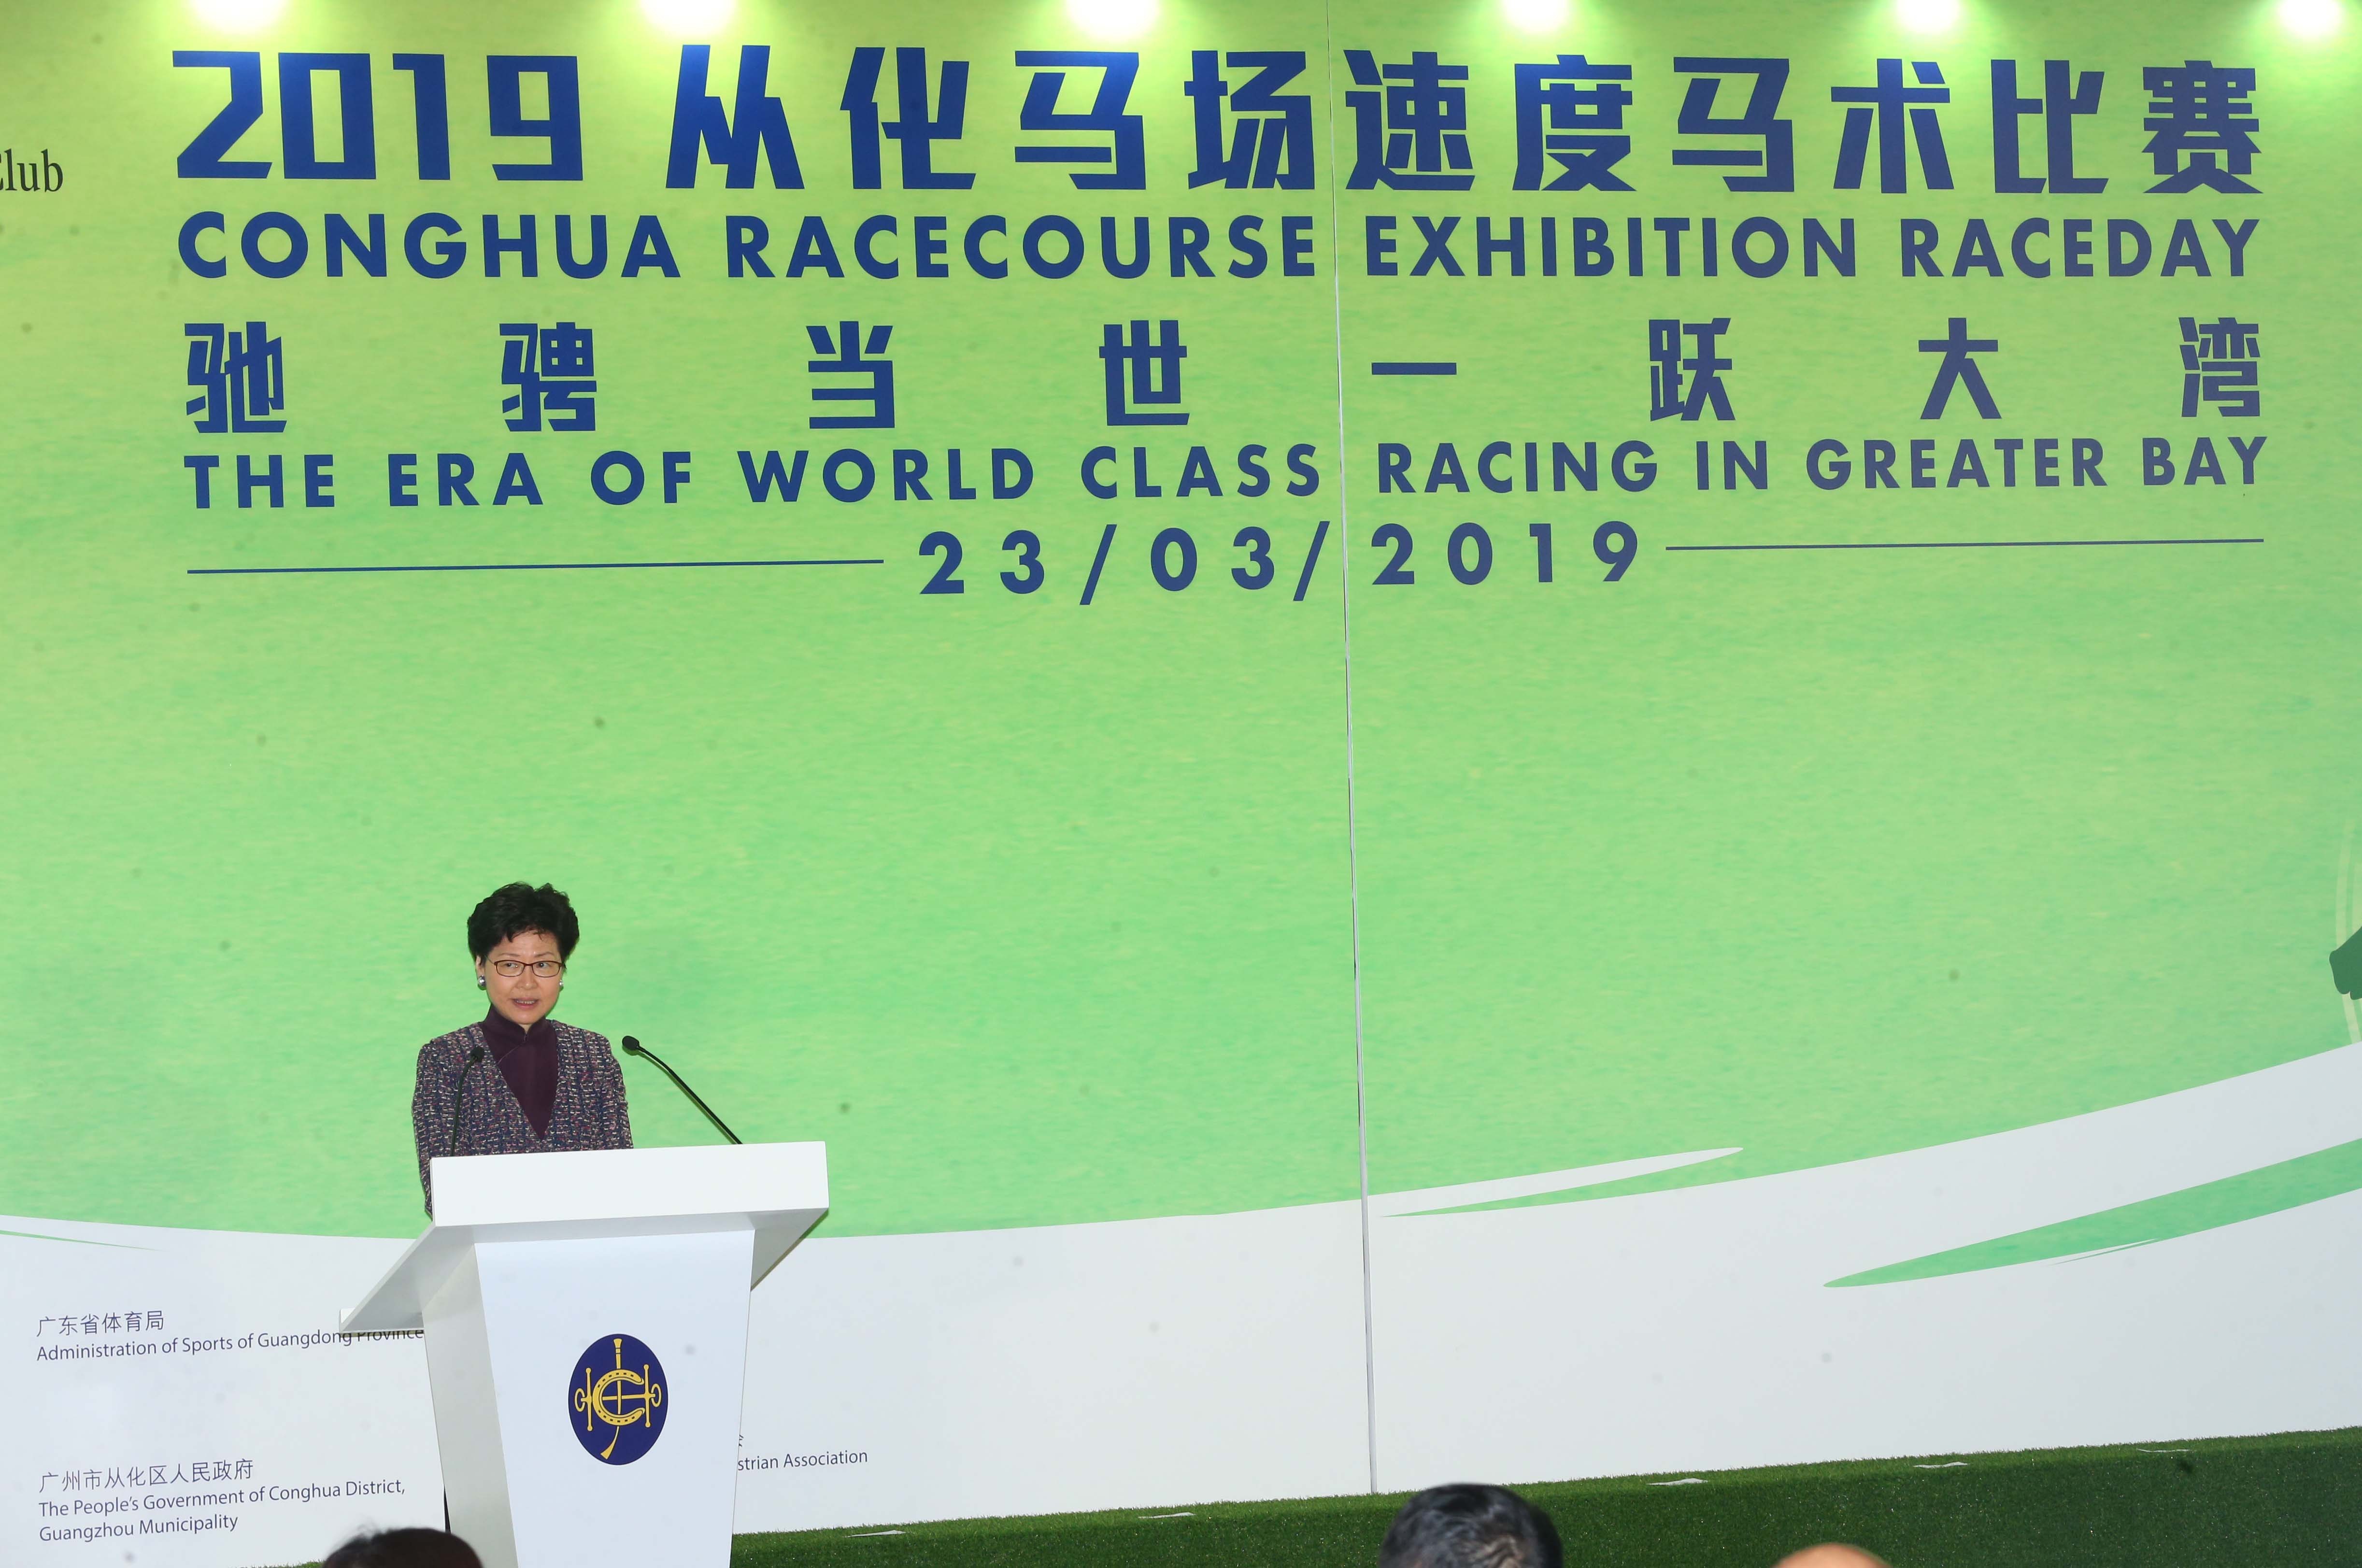 Hong Kong Chief Executive Carrie Lam talks at the first exhibition race day at Conghua. Photos: Kenneth Chan